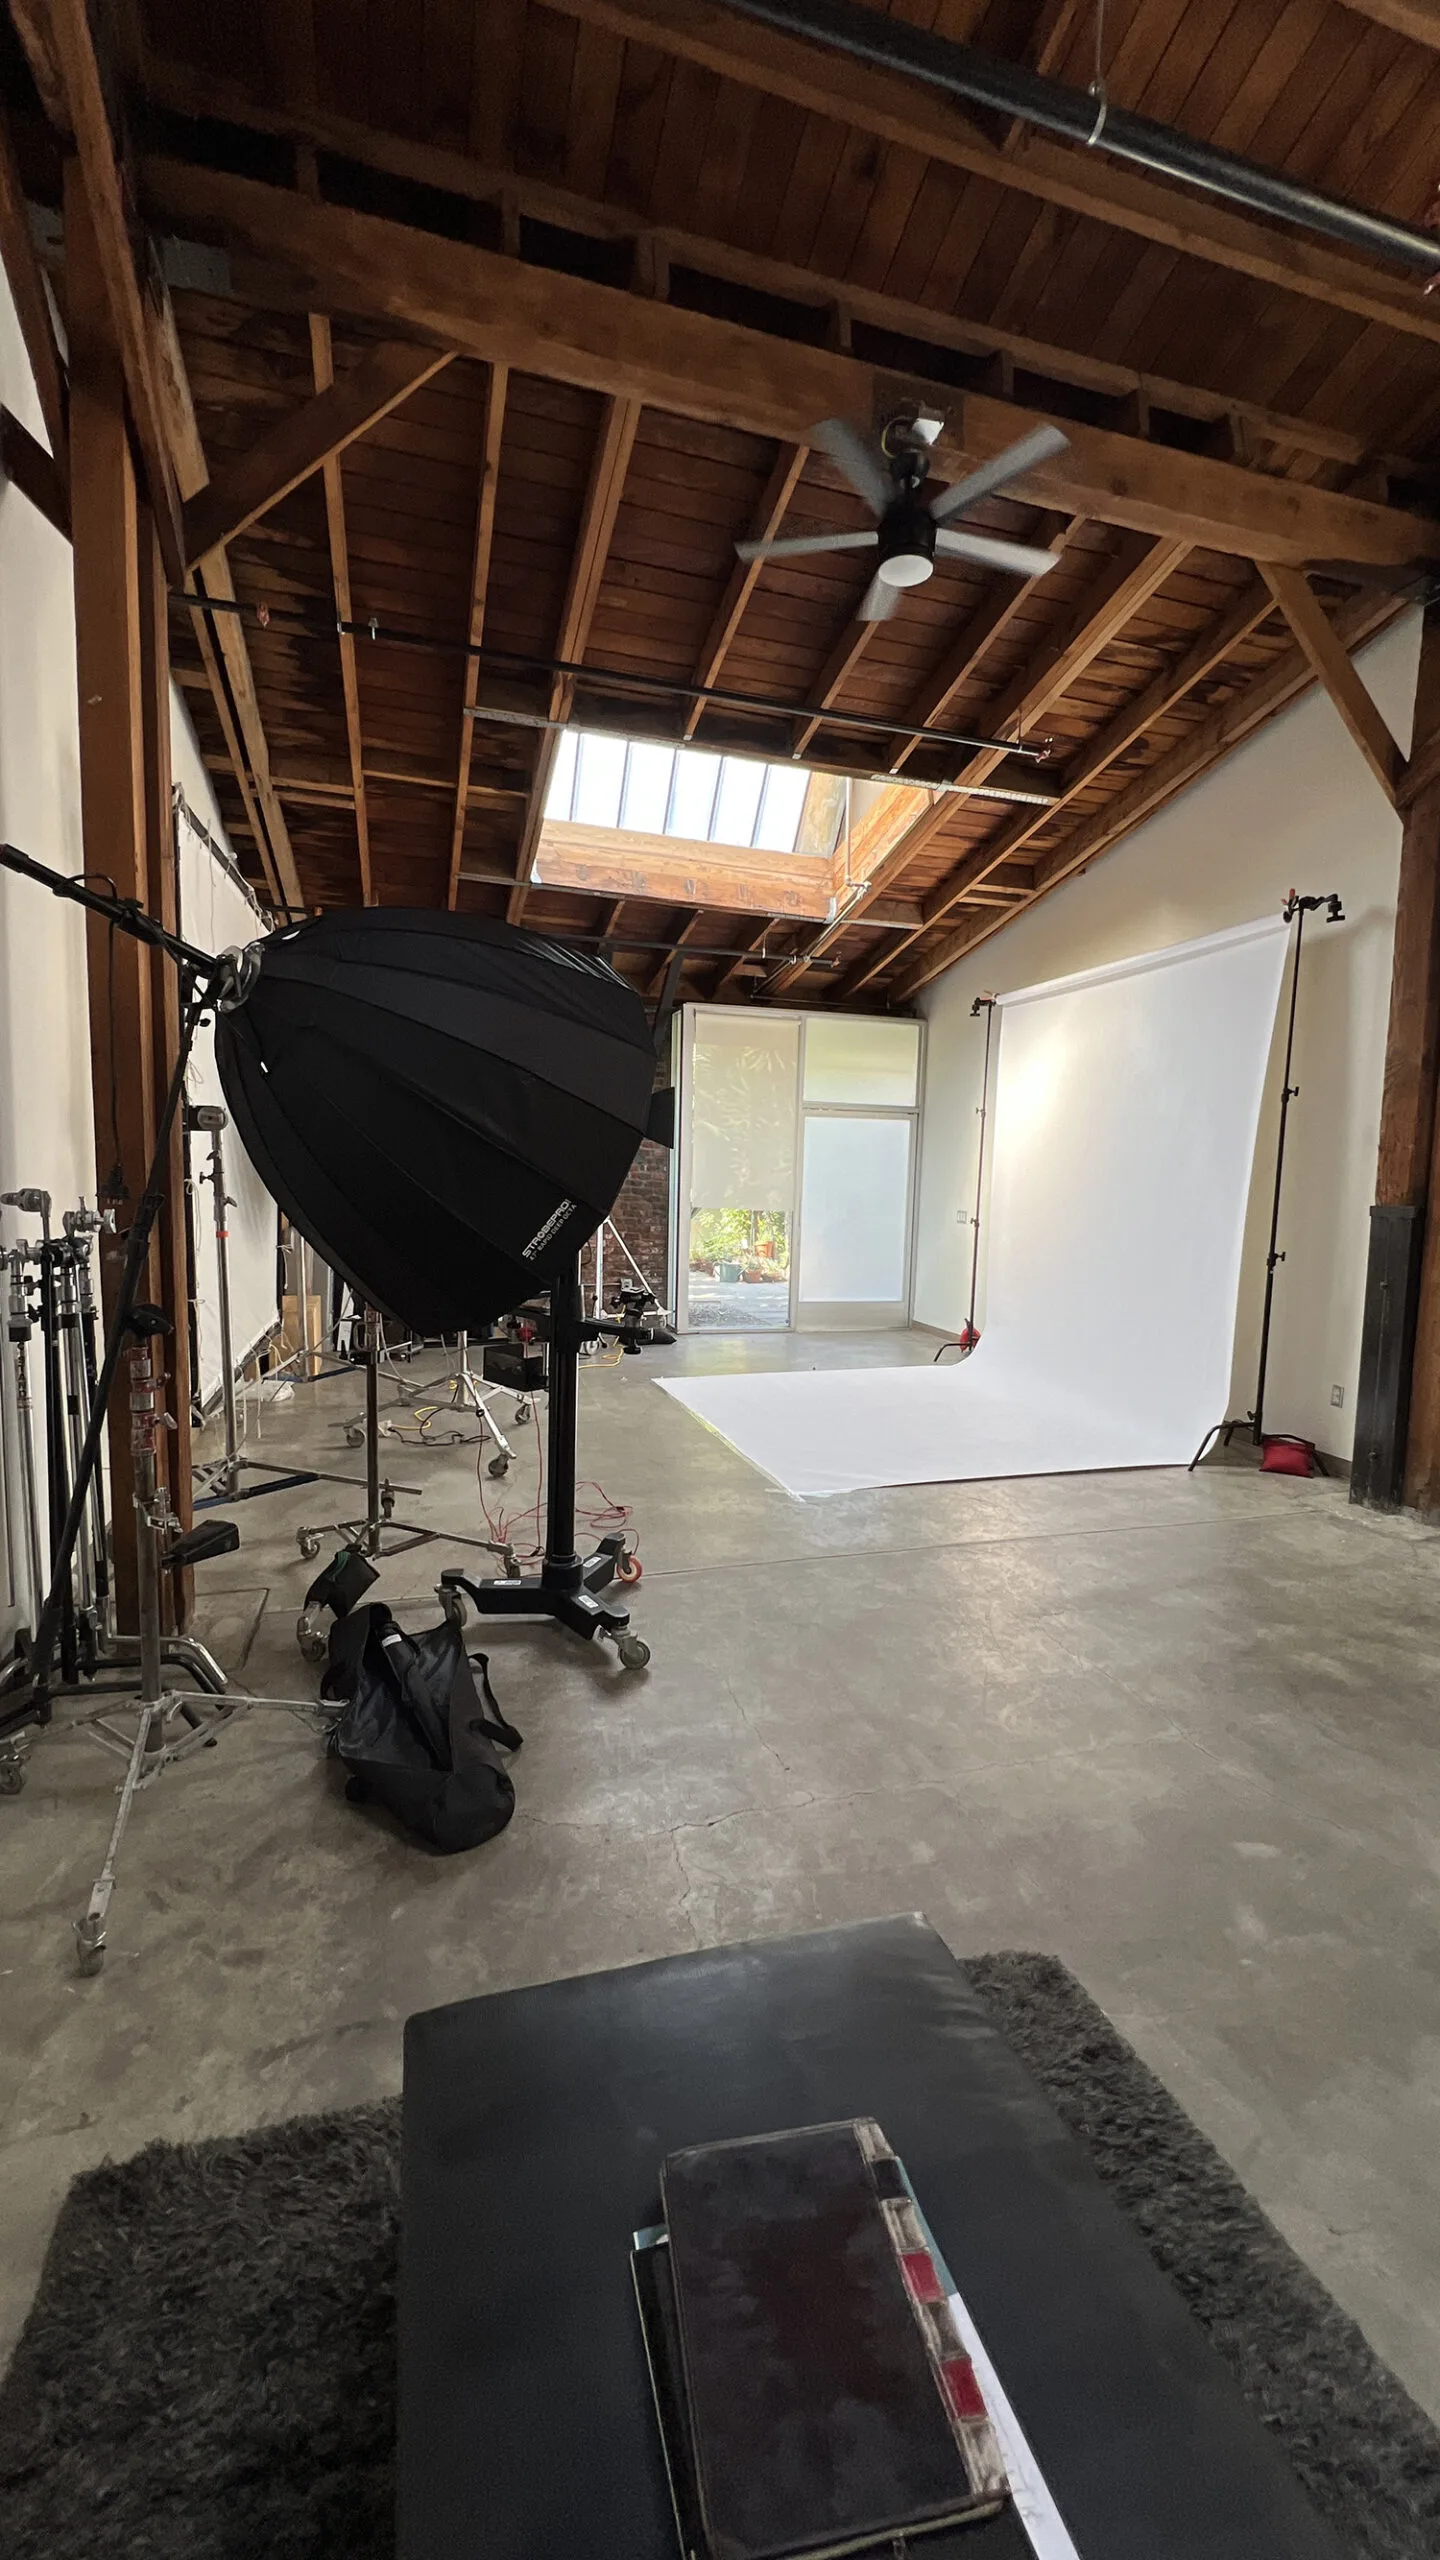 Interior view of Vidd Studios' spacious photography studio featuring a high wood beam ceiling with skylights, polished concrete floors, professional lighting equipment set up, and a large white cyclorama, ready for creative photo shoots.